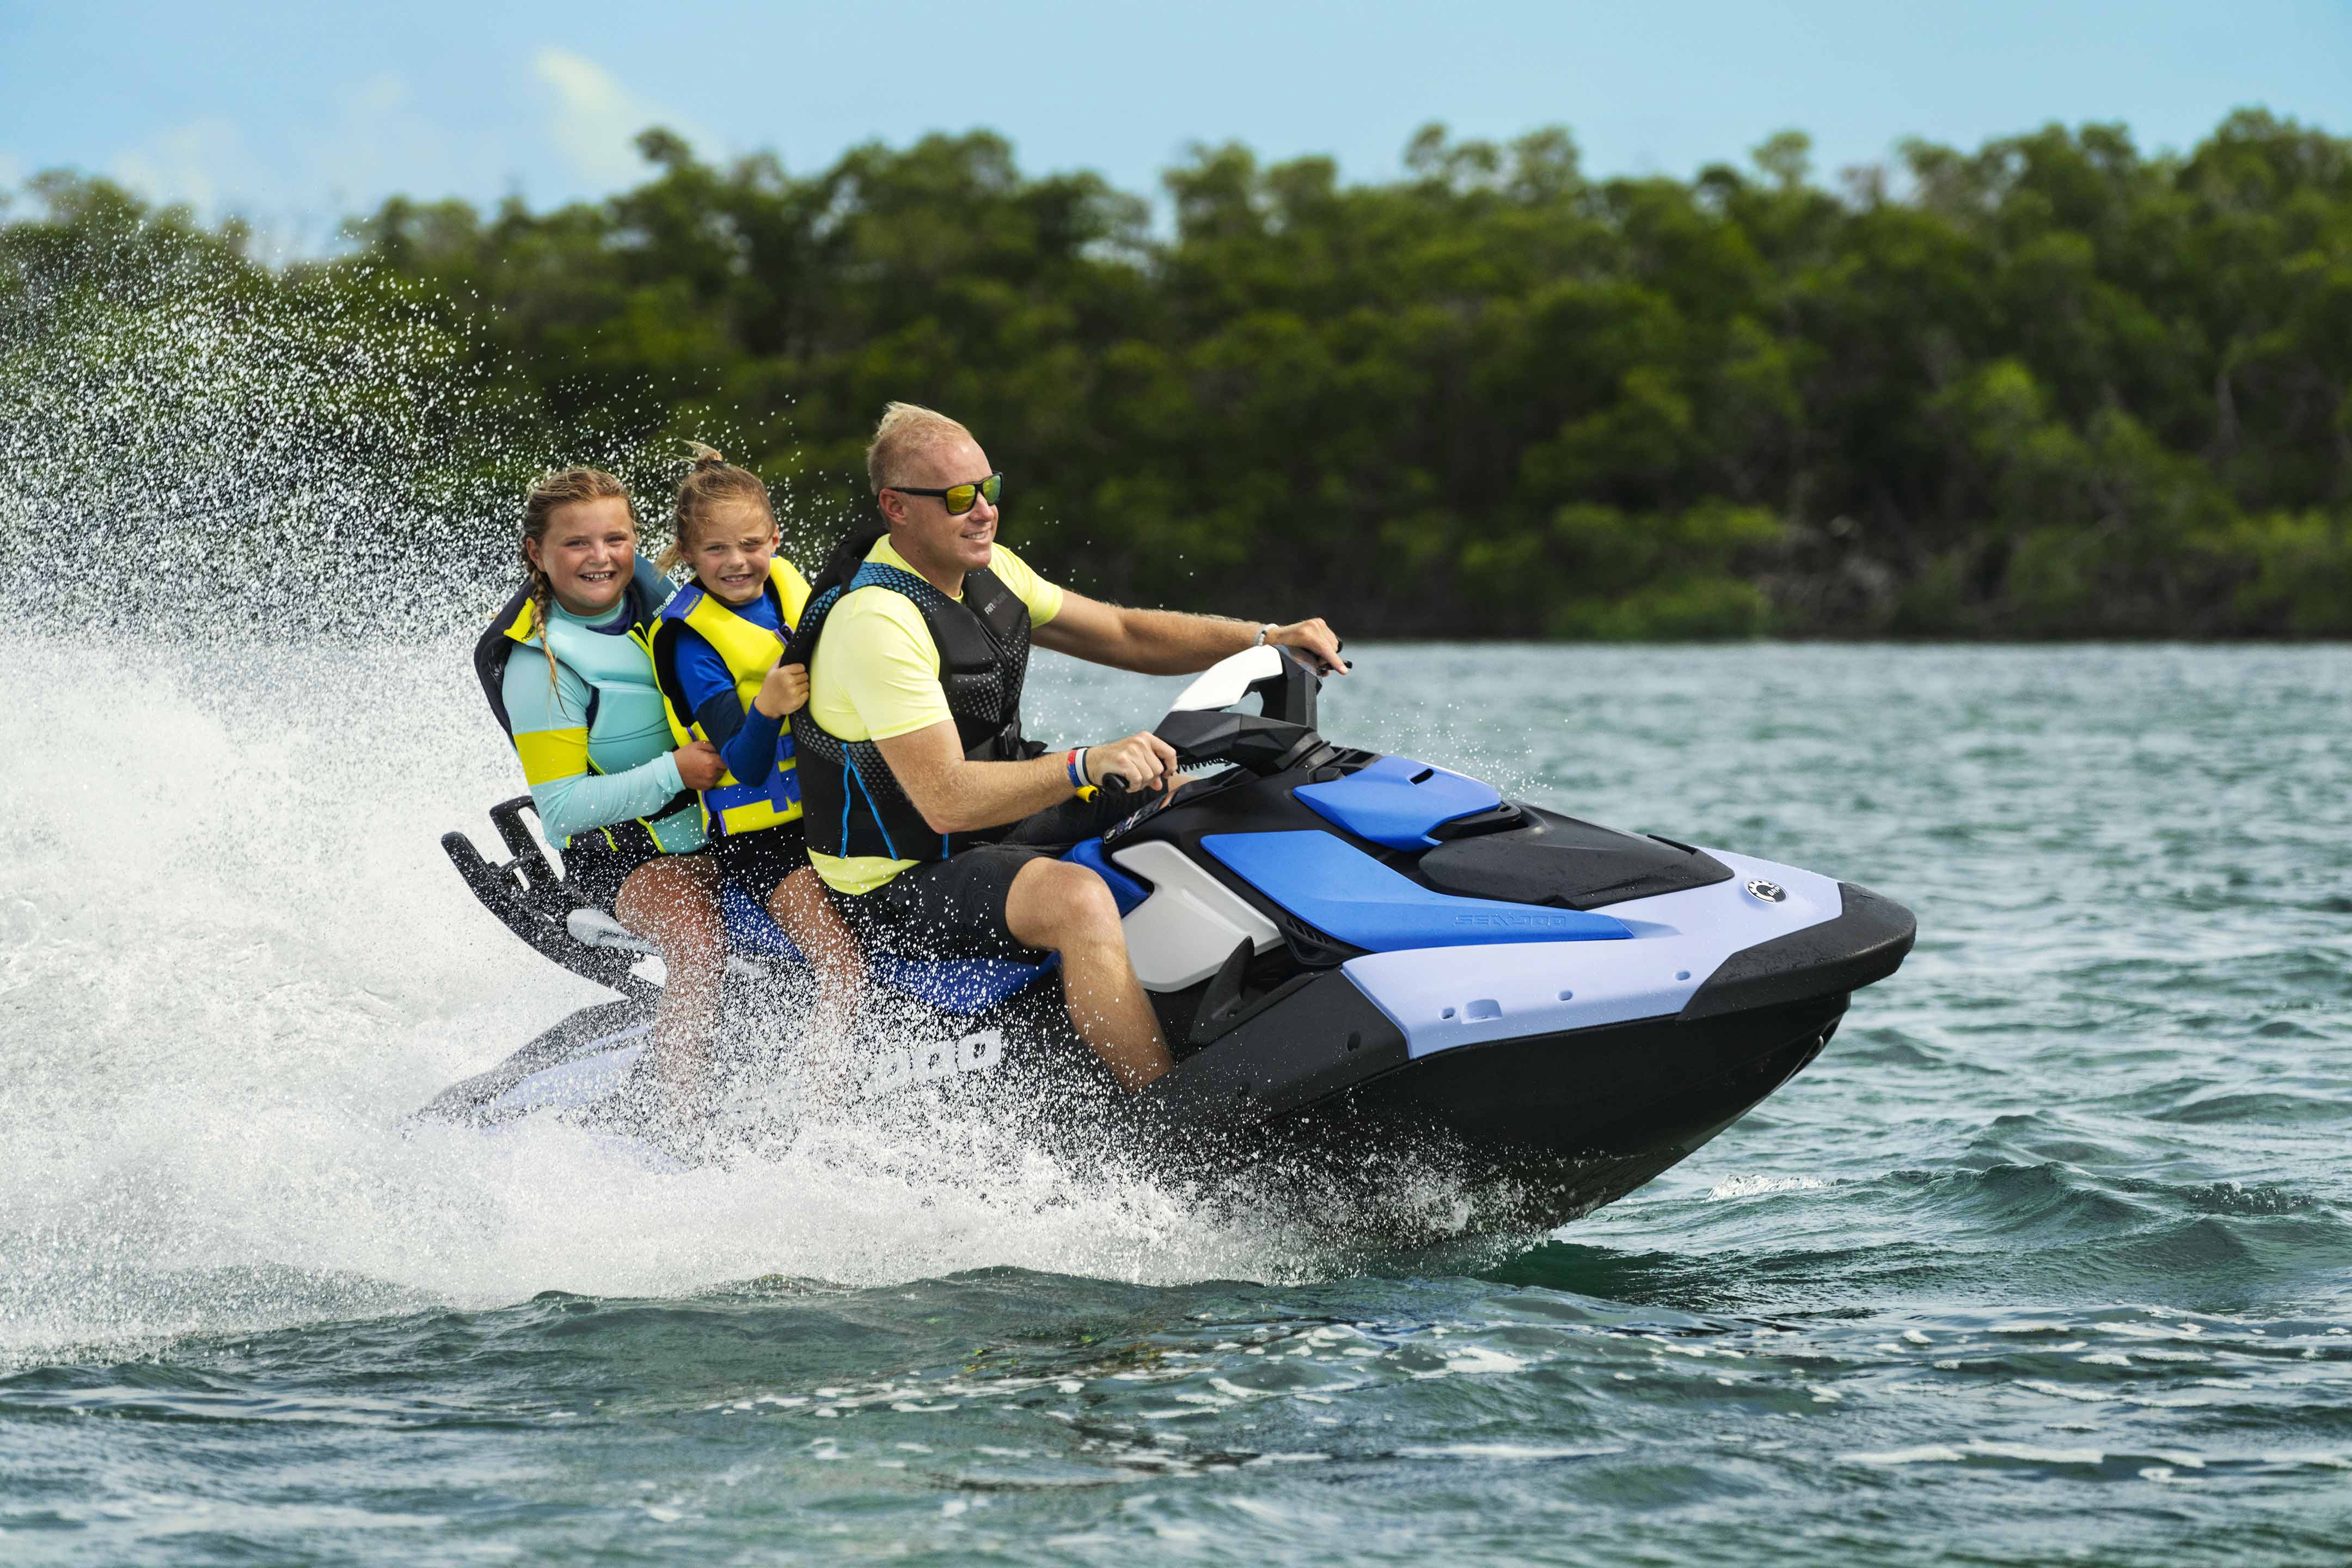 Father and his daughters enjoying a ride on a Sea-Doo Spark personal watercraft